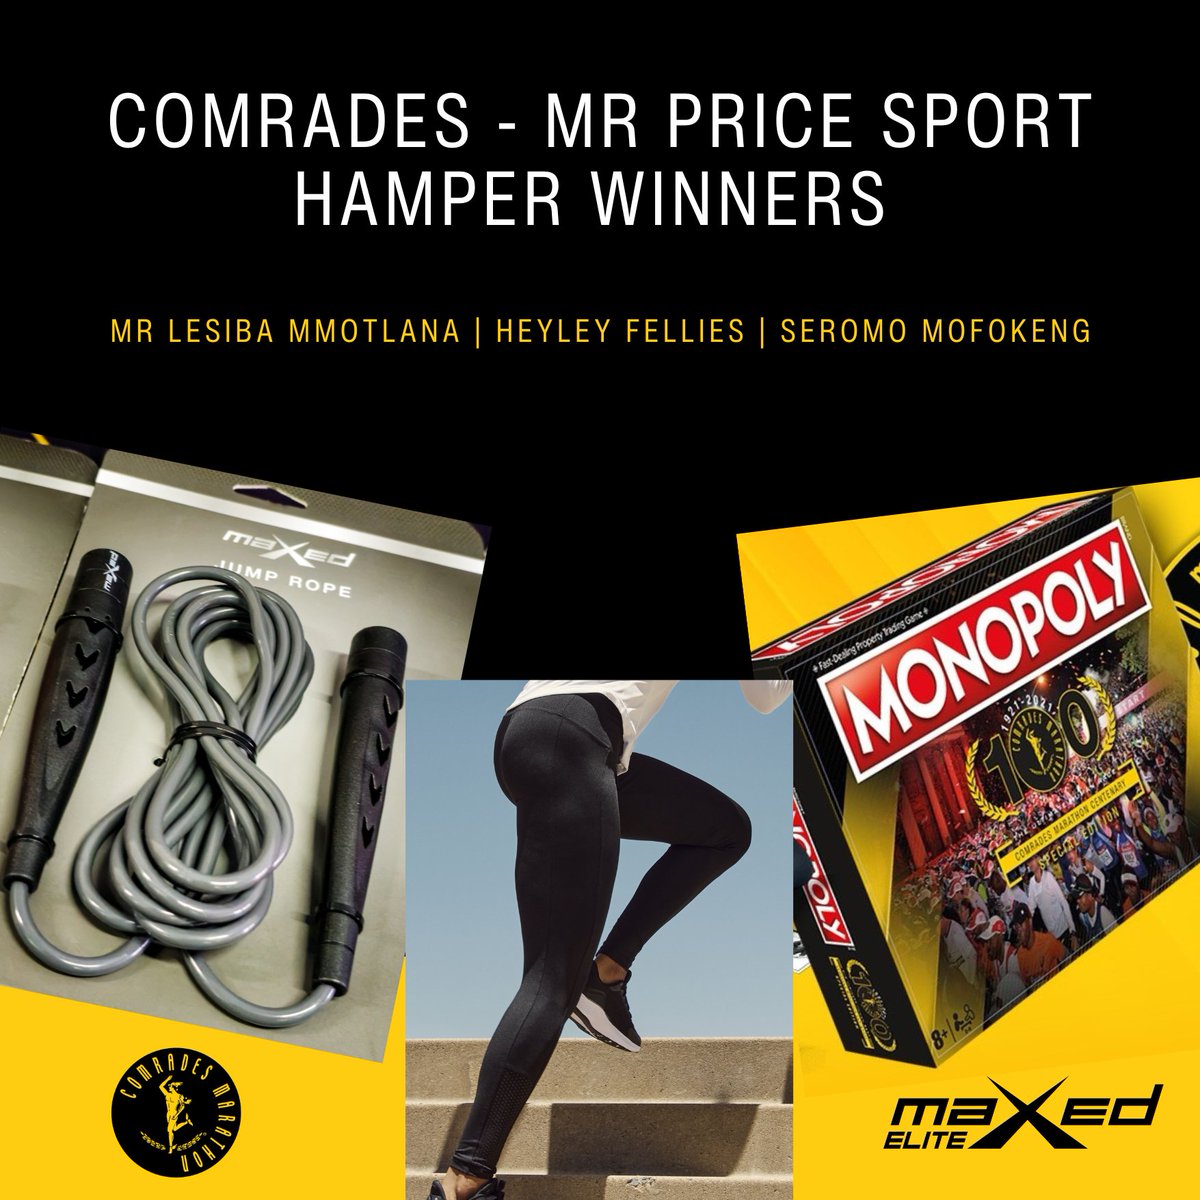 Congratulations to our 3 winners of the Comrades/Mr Price Sport hamper. @MrTrapnlos - Twitter @Heyley Fellies - Facebook @seromo mofokeng - Instagram Wanna be part of the #ComradesSuperFan?